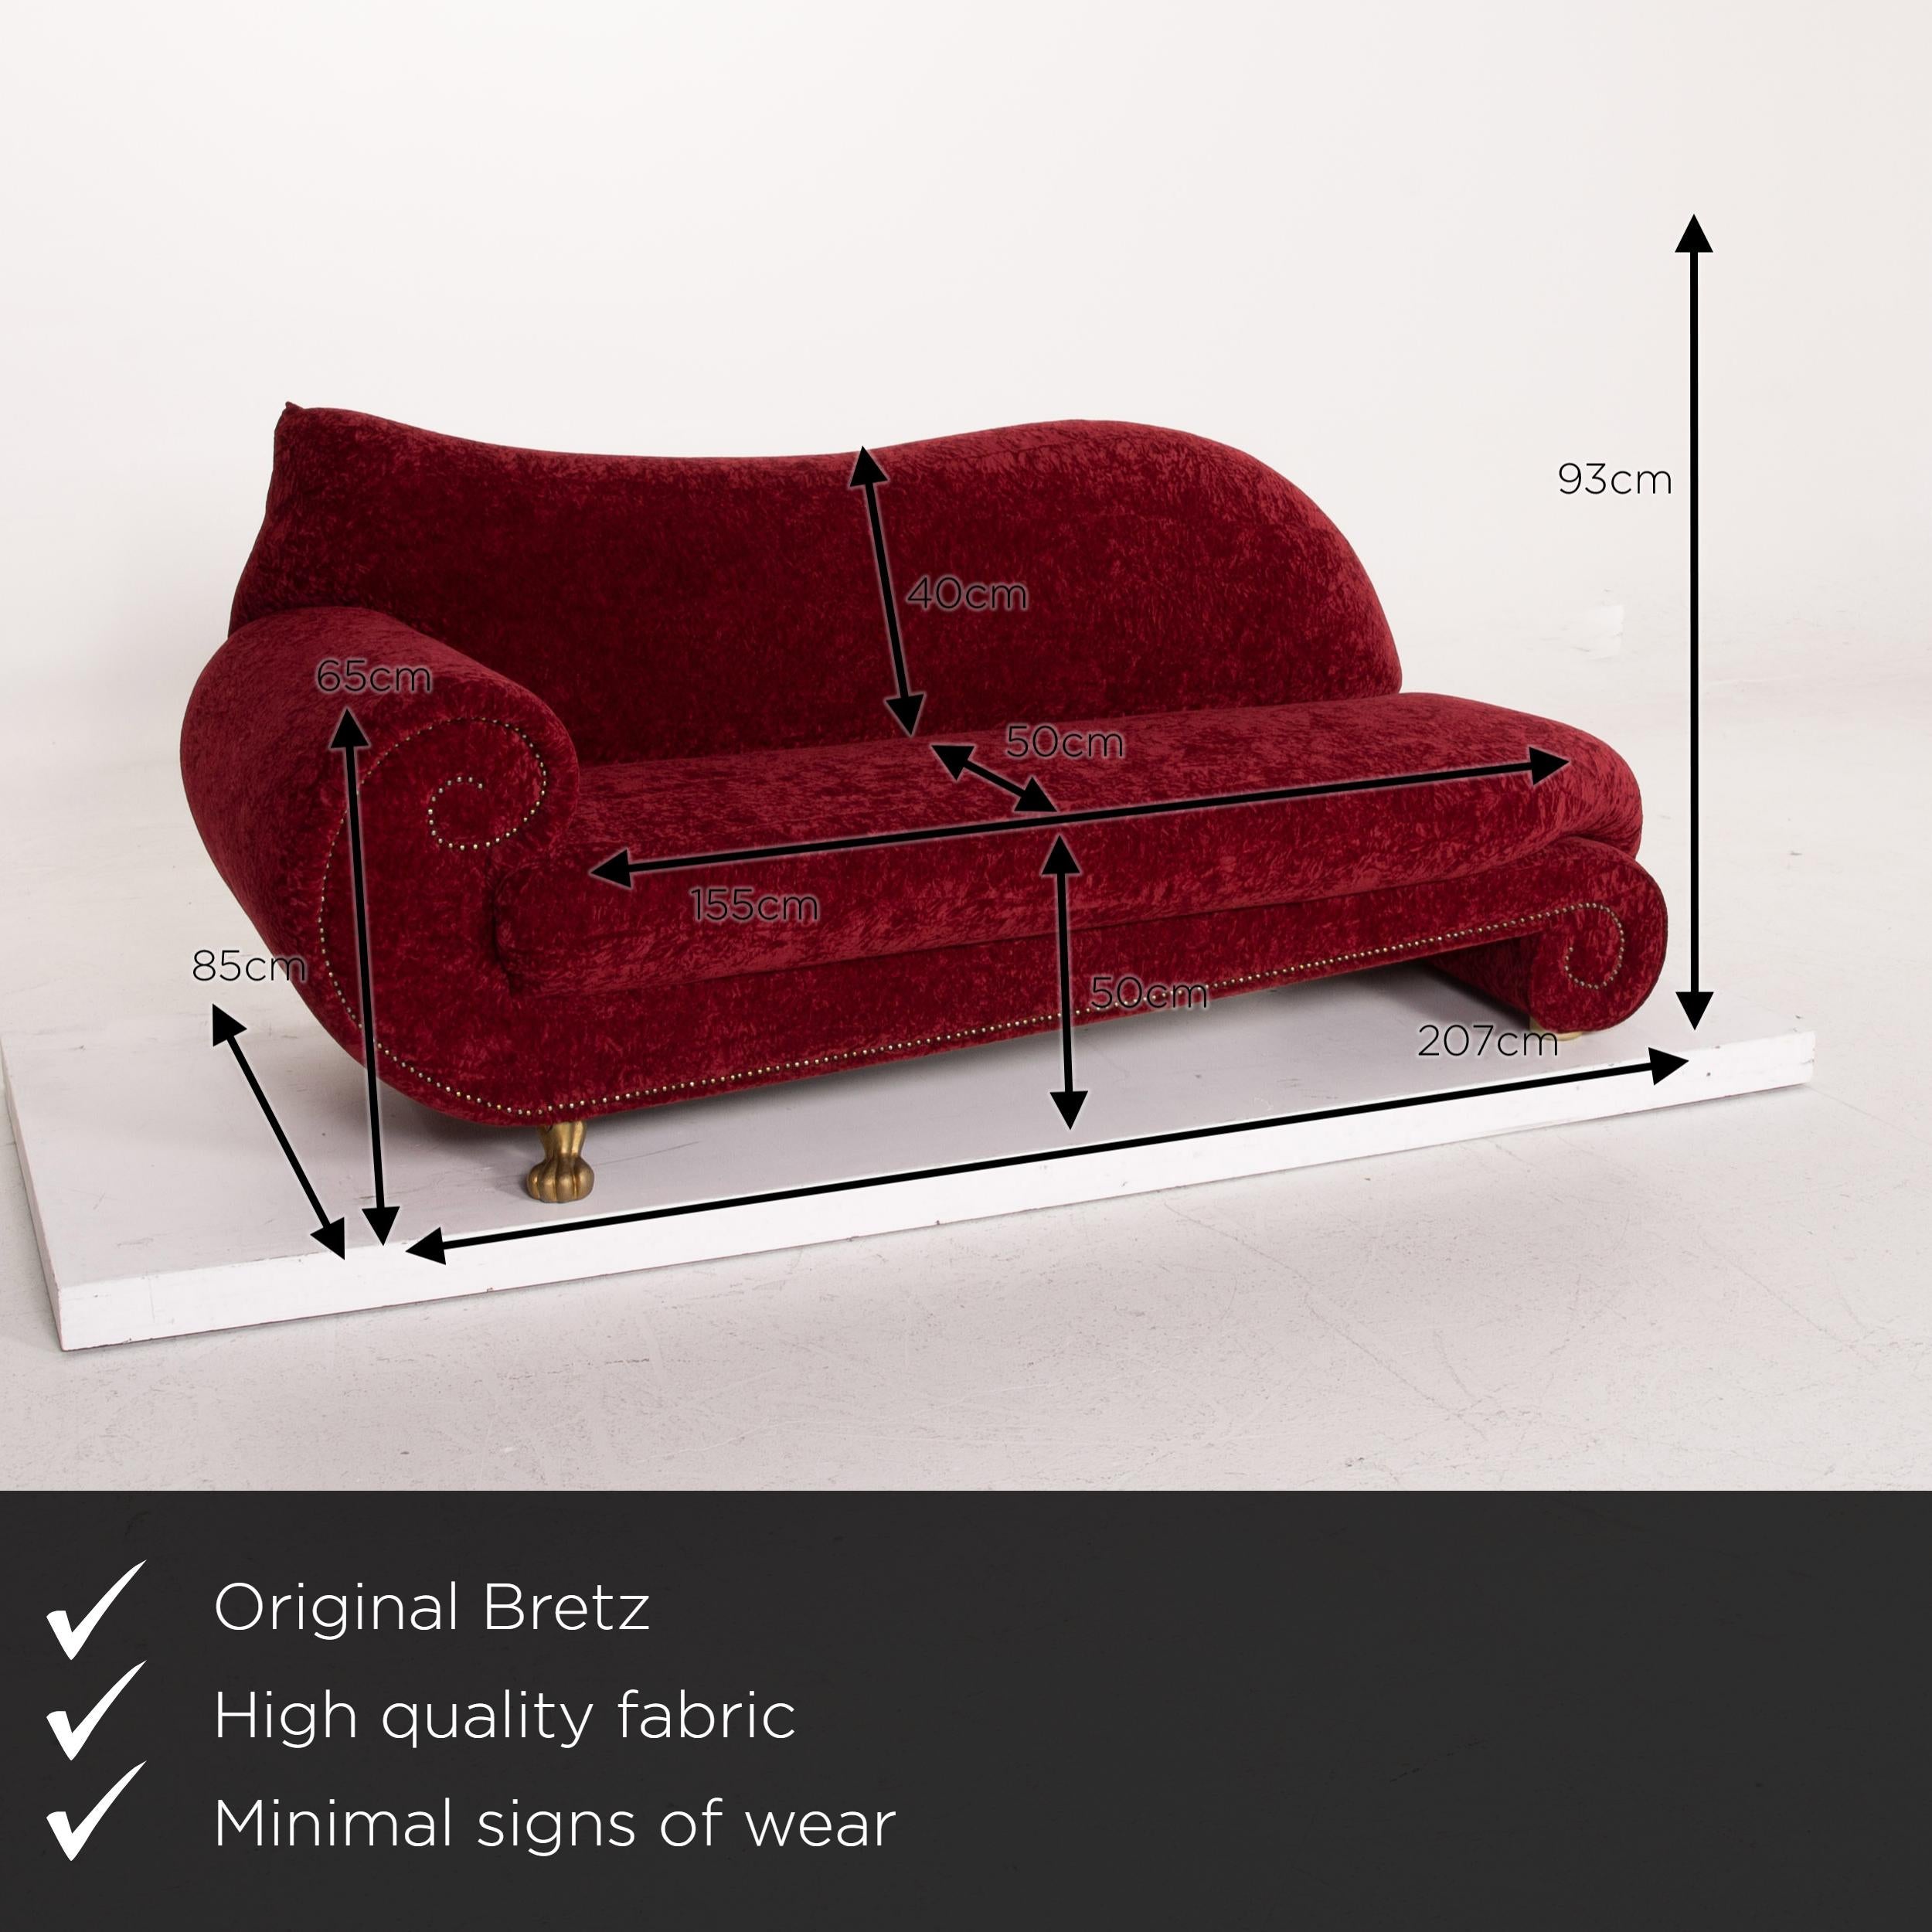 We present to you a Bretz Gaudi fabric sofa red three-seat incl. Cushion.


 Product measurements in centimeters:
 

Depth 85
Width 207
Height 93
Seat height 50
Rest height 65
Seat depth 50
Seat width 155
Back height 40.
 